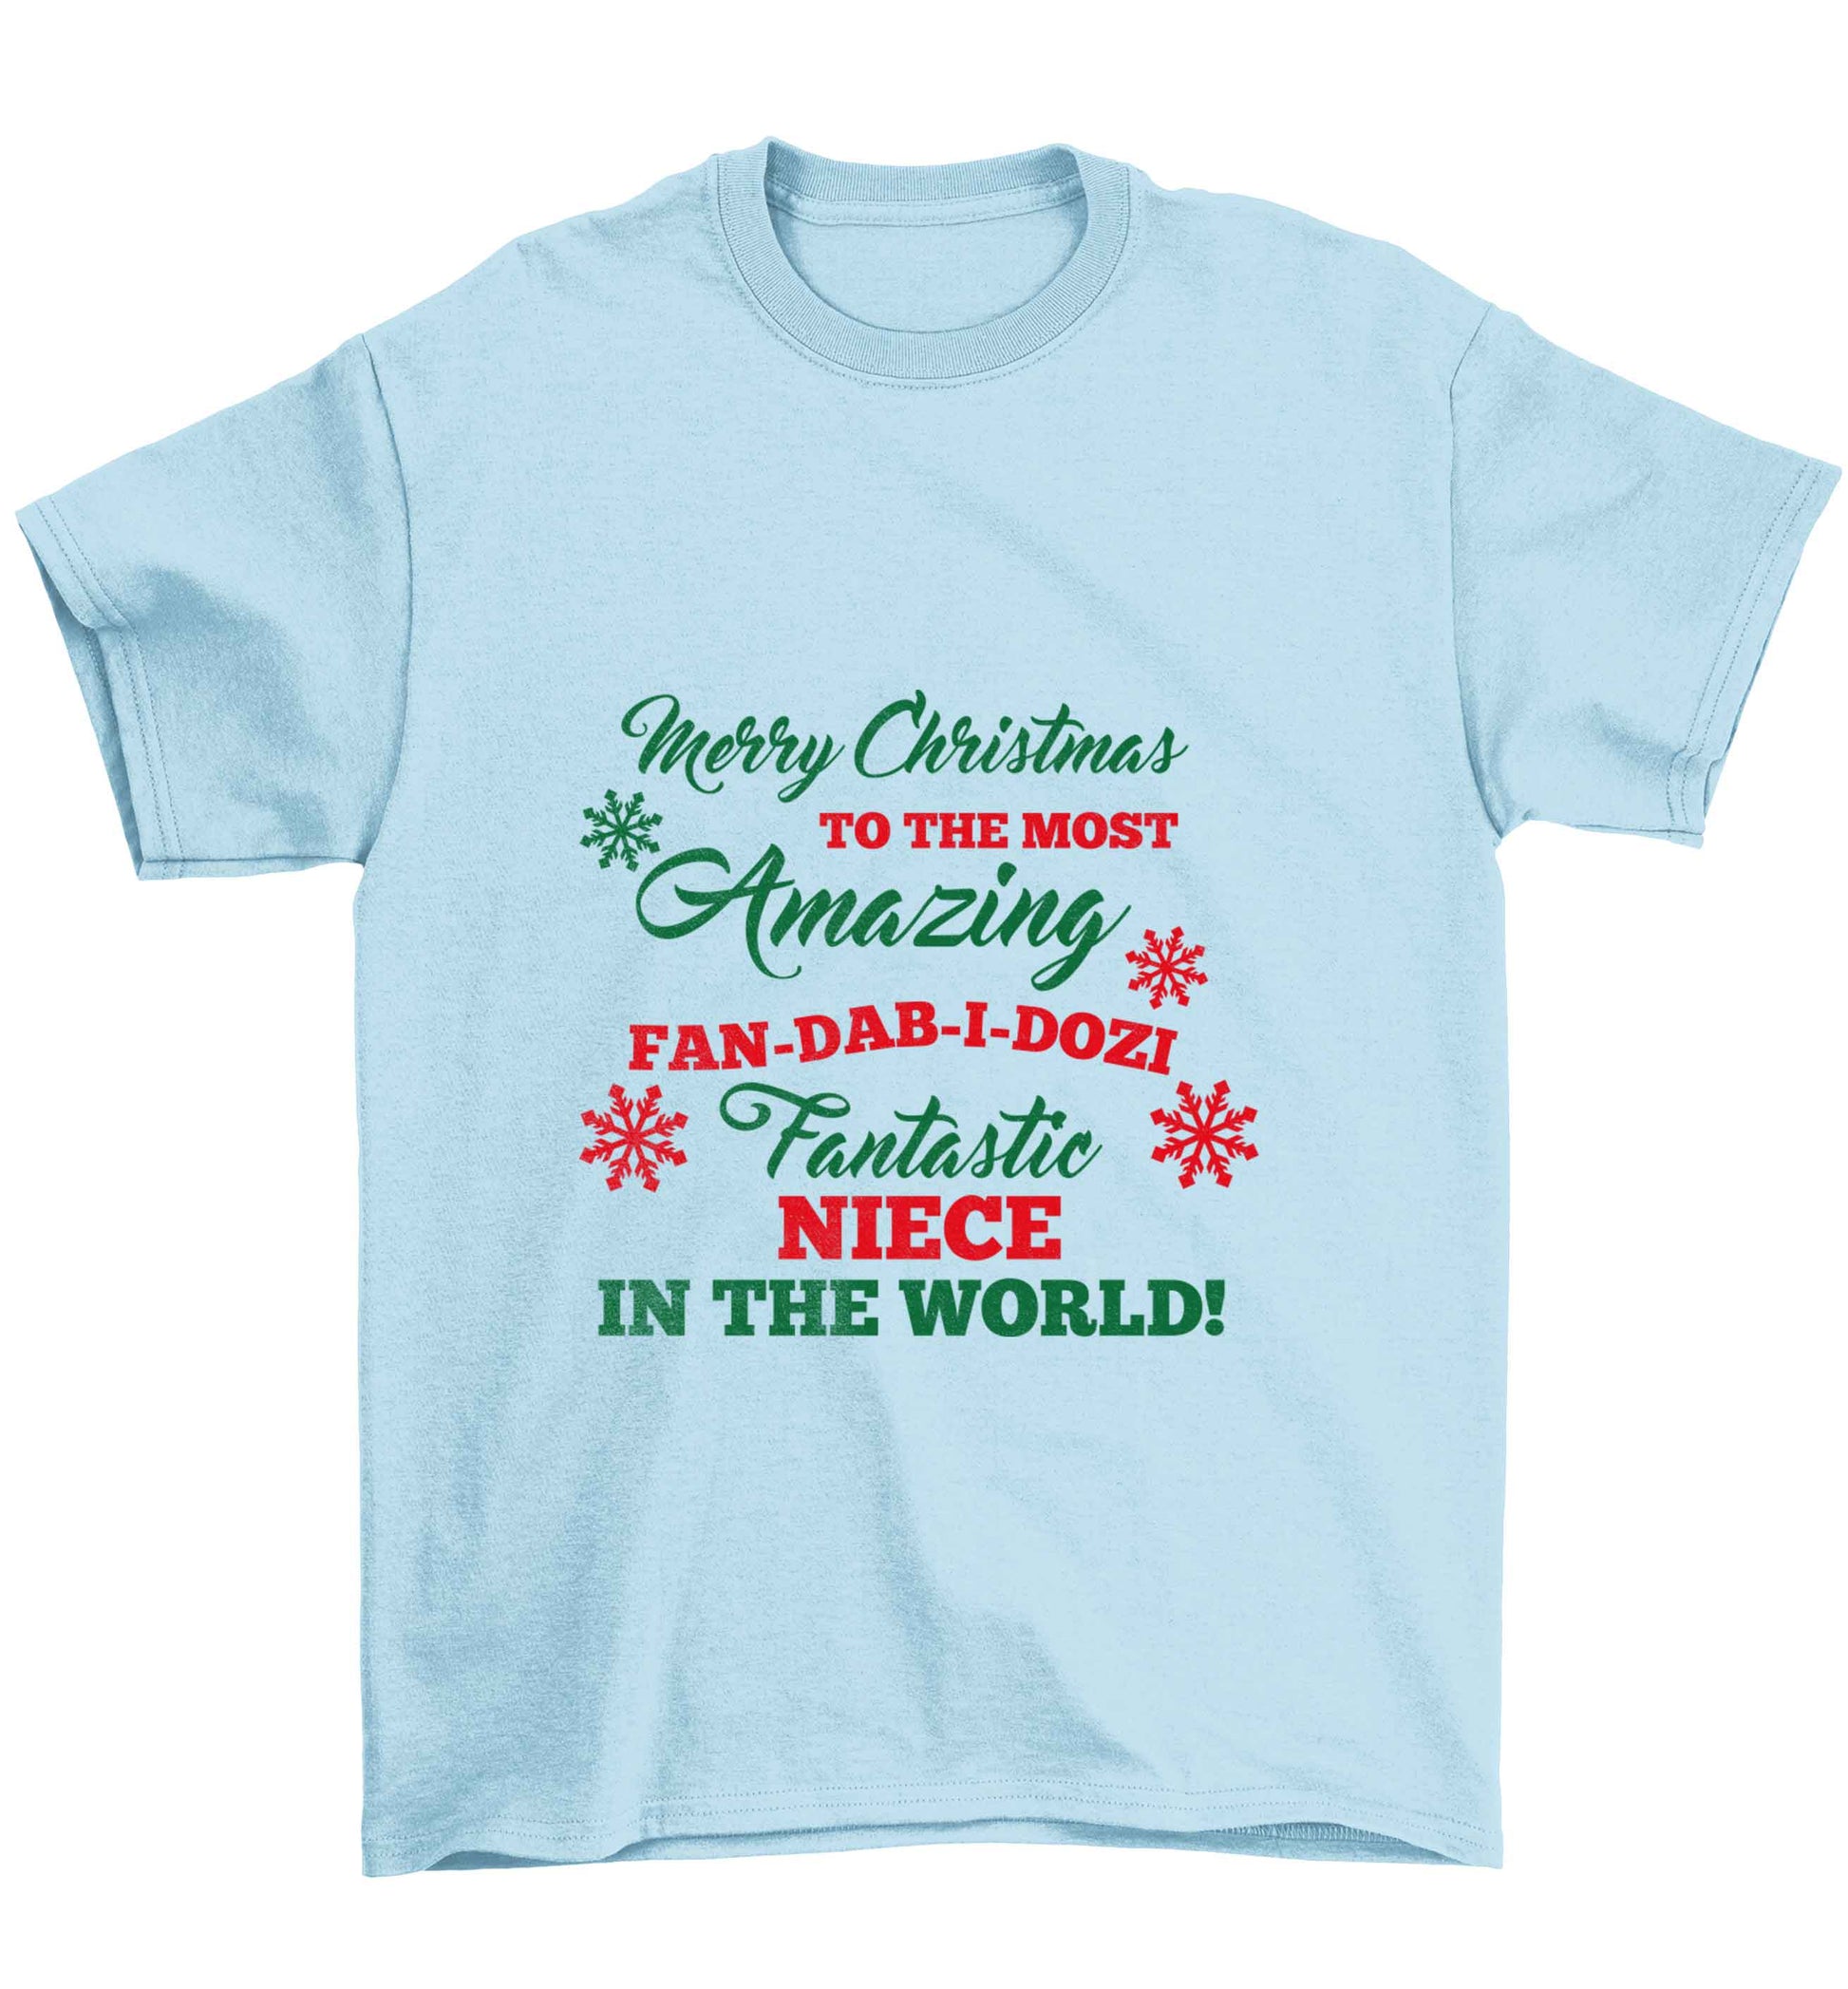 Merry Christmas to the most amazing fan-dab-i-dozi fantasic Niece in the world Children's light blue Tshirt 12-13 Years